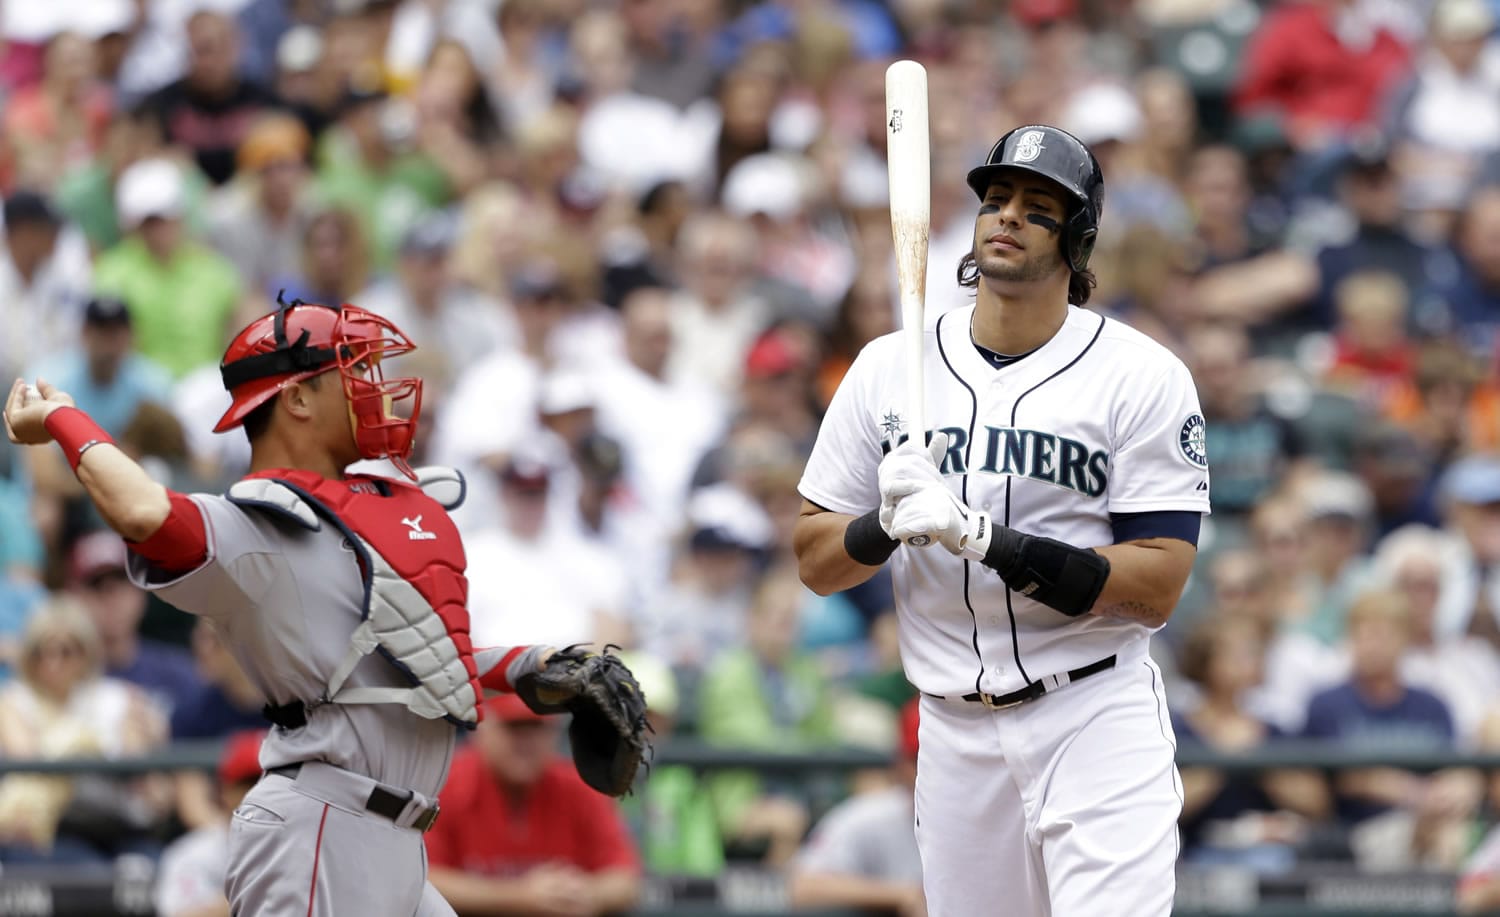 Seattle Mariners' Michael Morse, right, turns toward the dugout after striking out in the third inning Sunday.